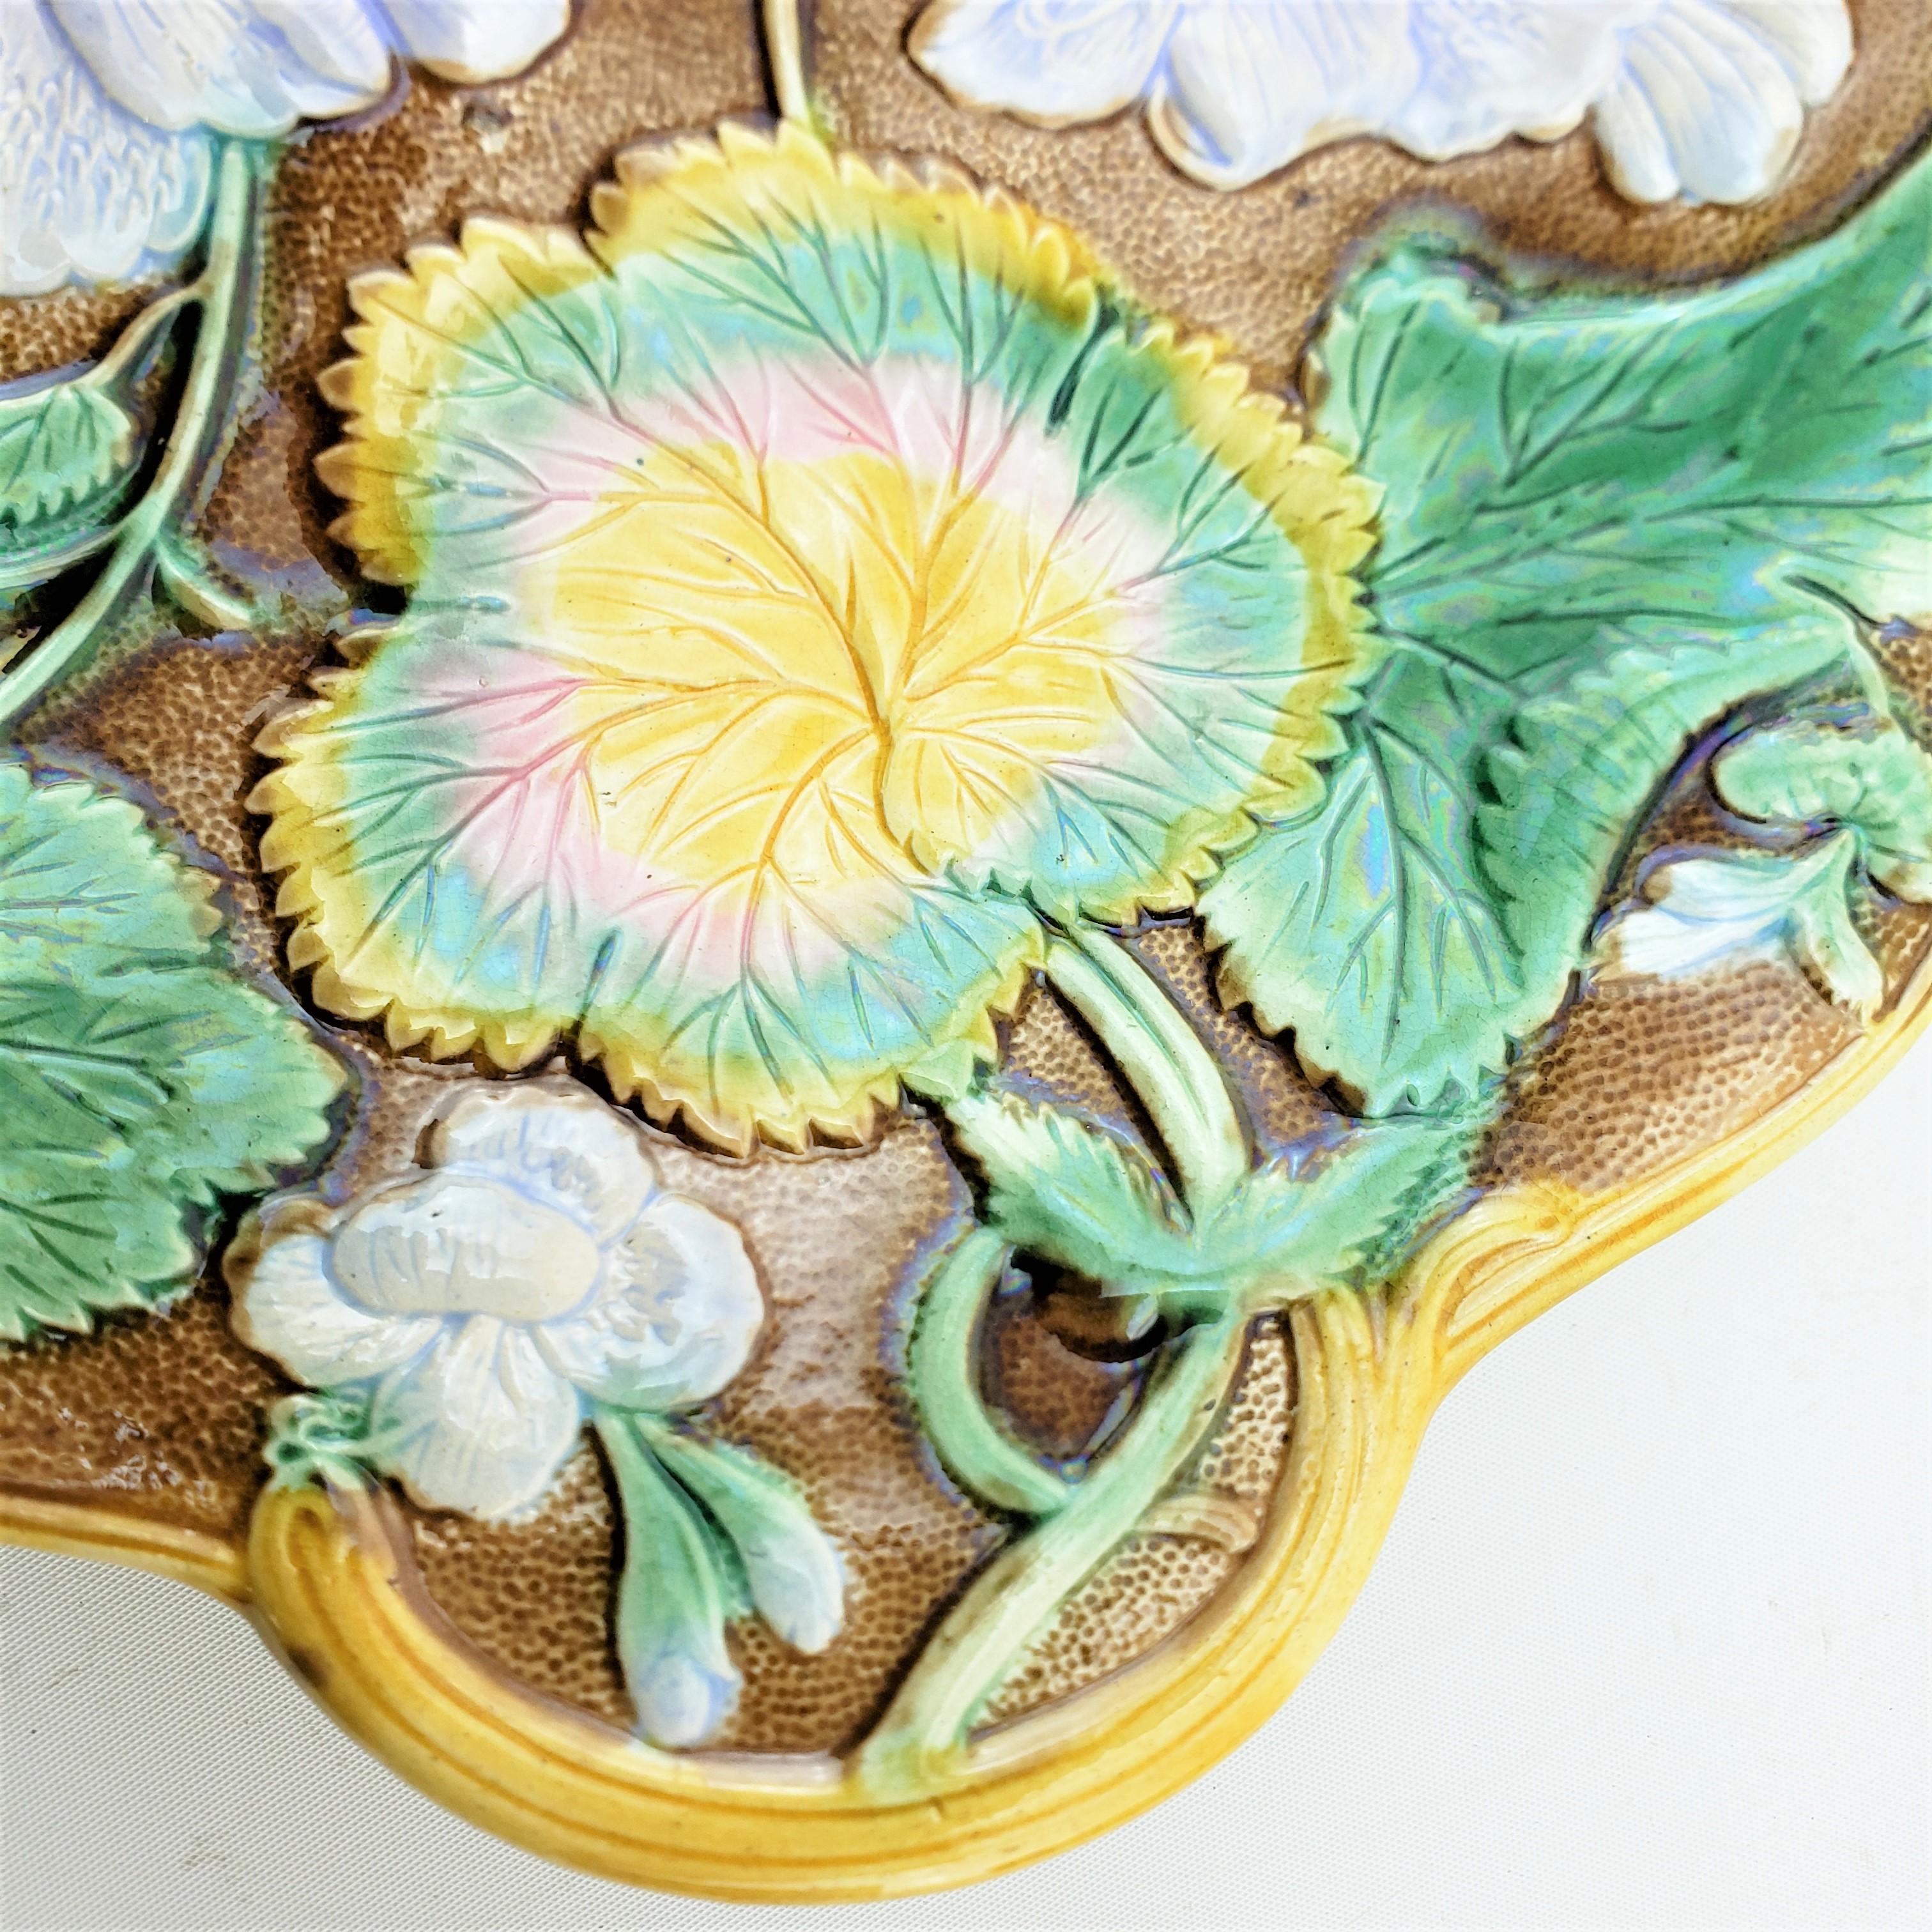 Small Antique Majolica Serving Dish or Platter with Leaf & Flower Decoration For Sale 5